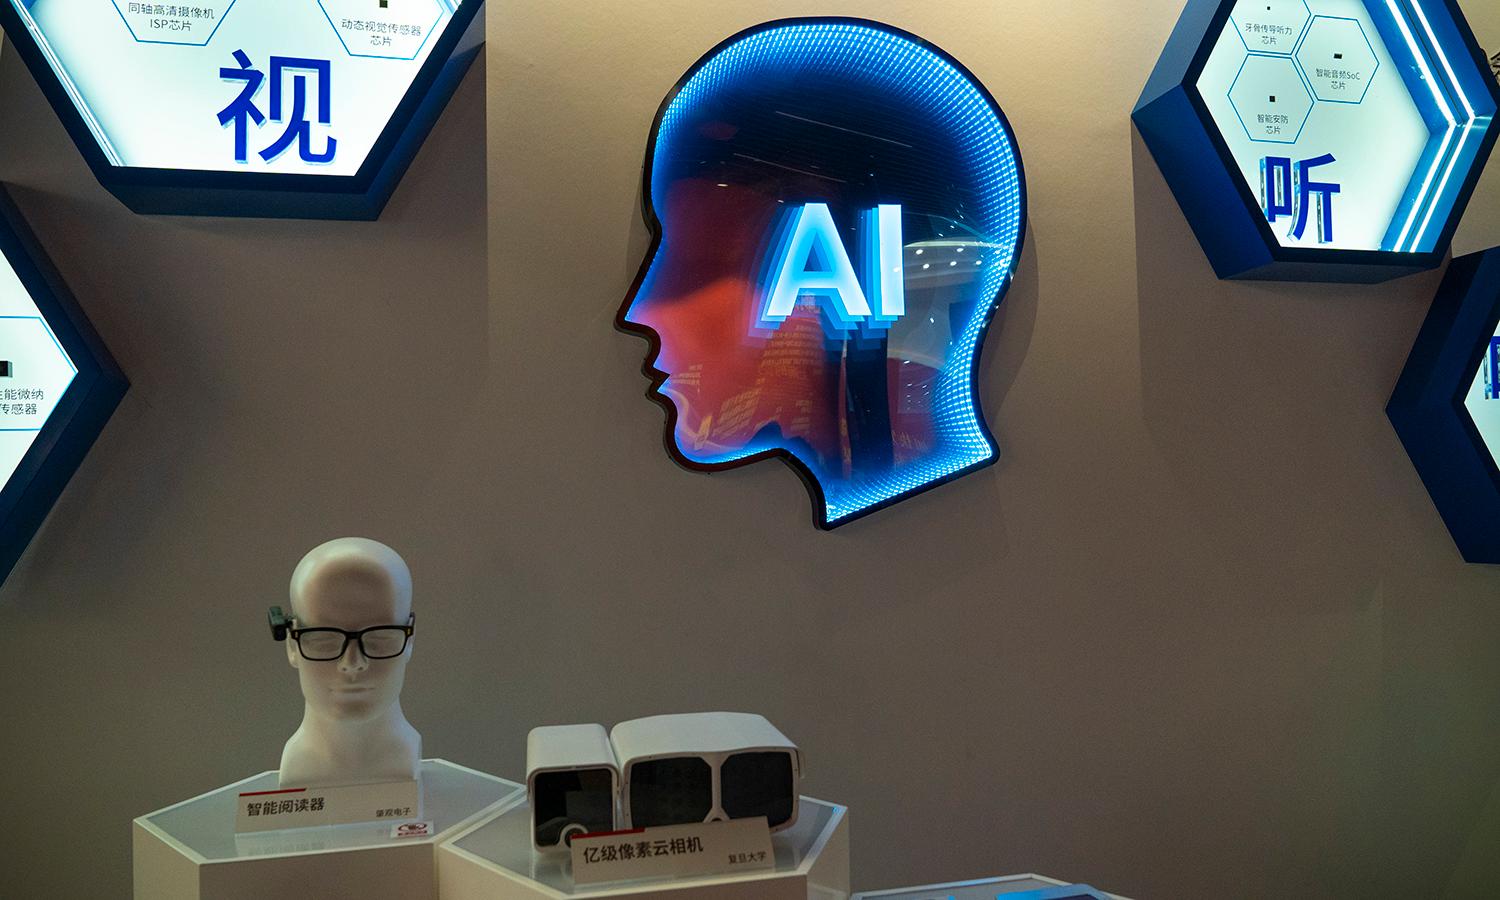 Cutting-edge applications of artificial intelligence are seen on display at the Artificial Intelligence Pavilion of Zhangjiang Future Park during a state organized media tour on June 18, 2021, in Shanghai, China. (Photo by Andrea Verdelli/Getty Images)